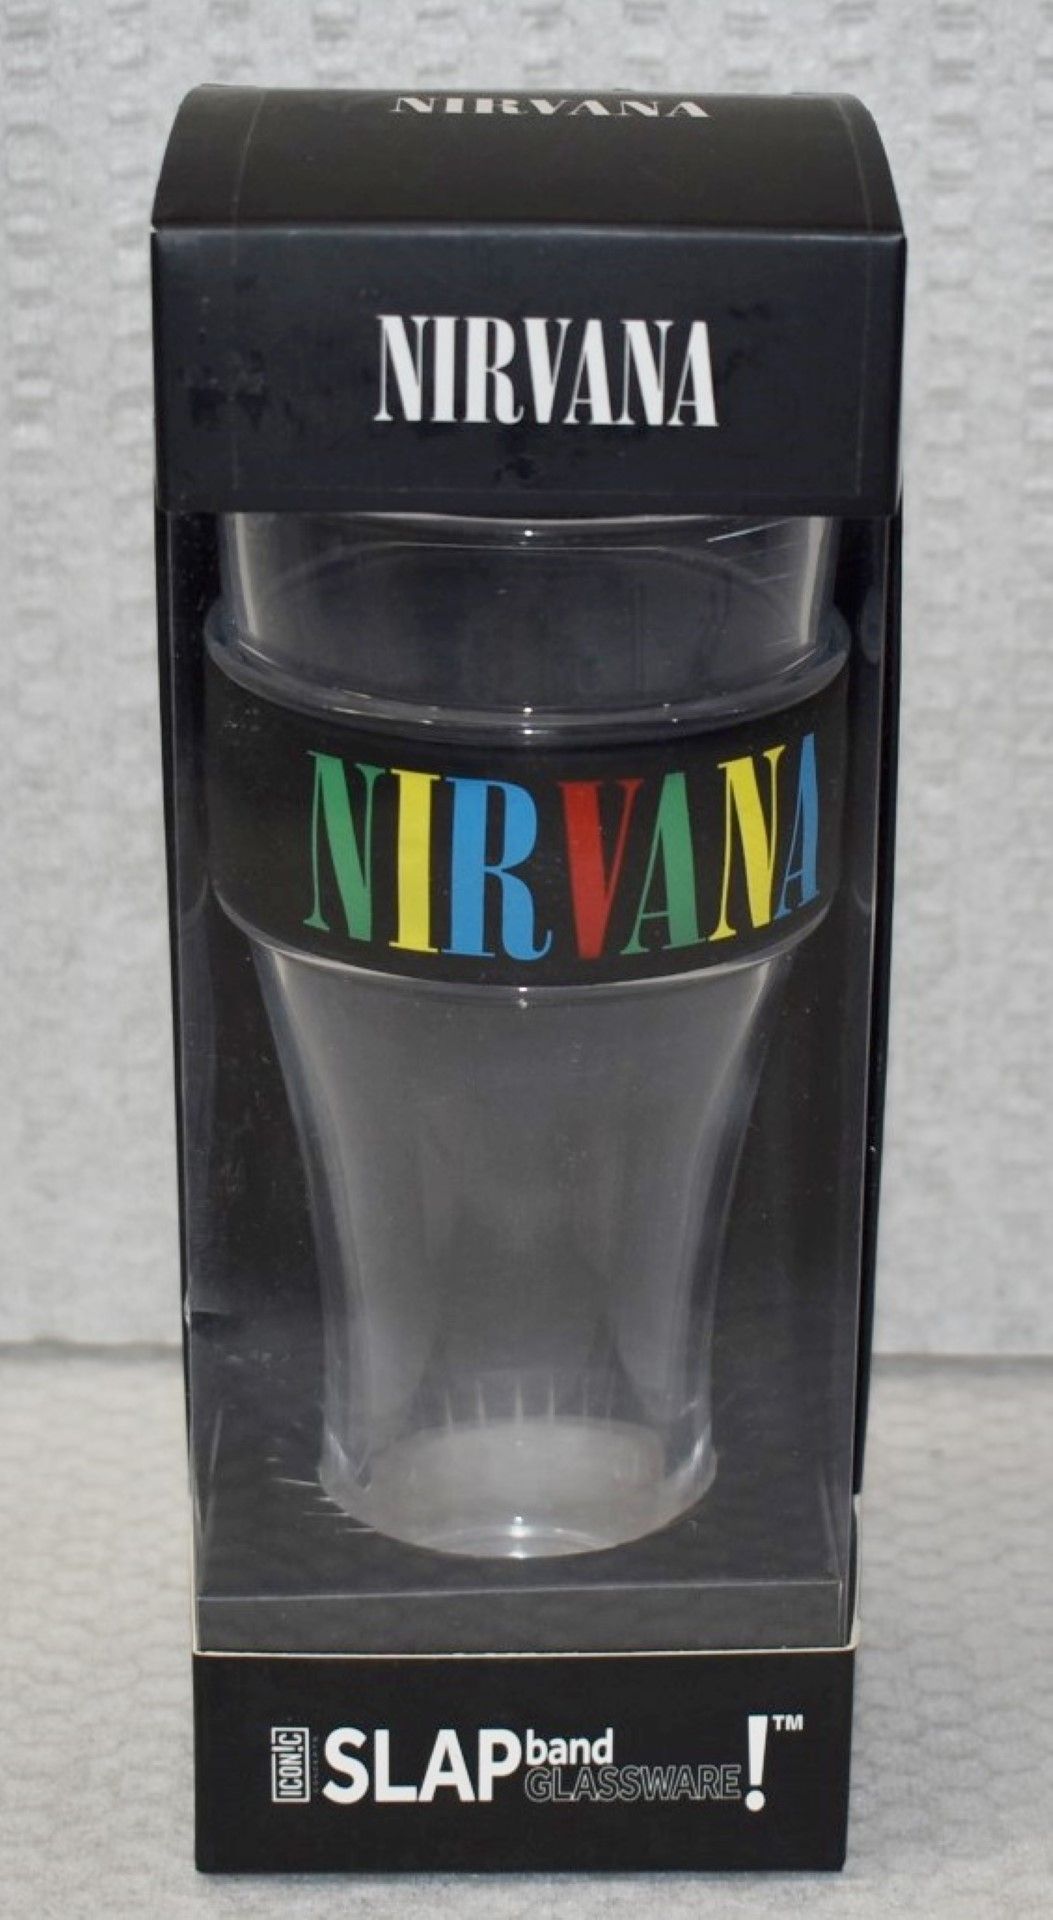 1 x Nirvana Slap Band Drinking Glass With Gift Box - Officially Licensed Merchandise - New & Unused - Image 2 of 7